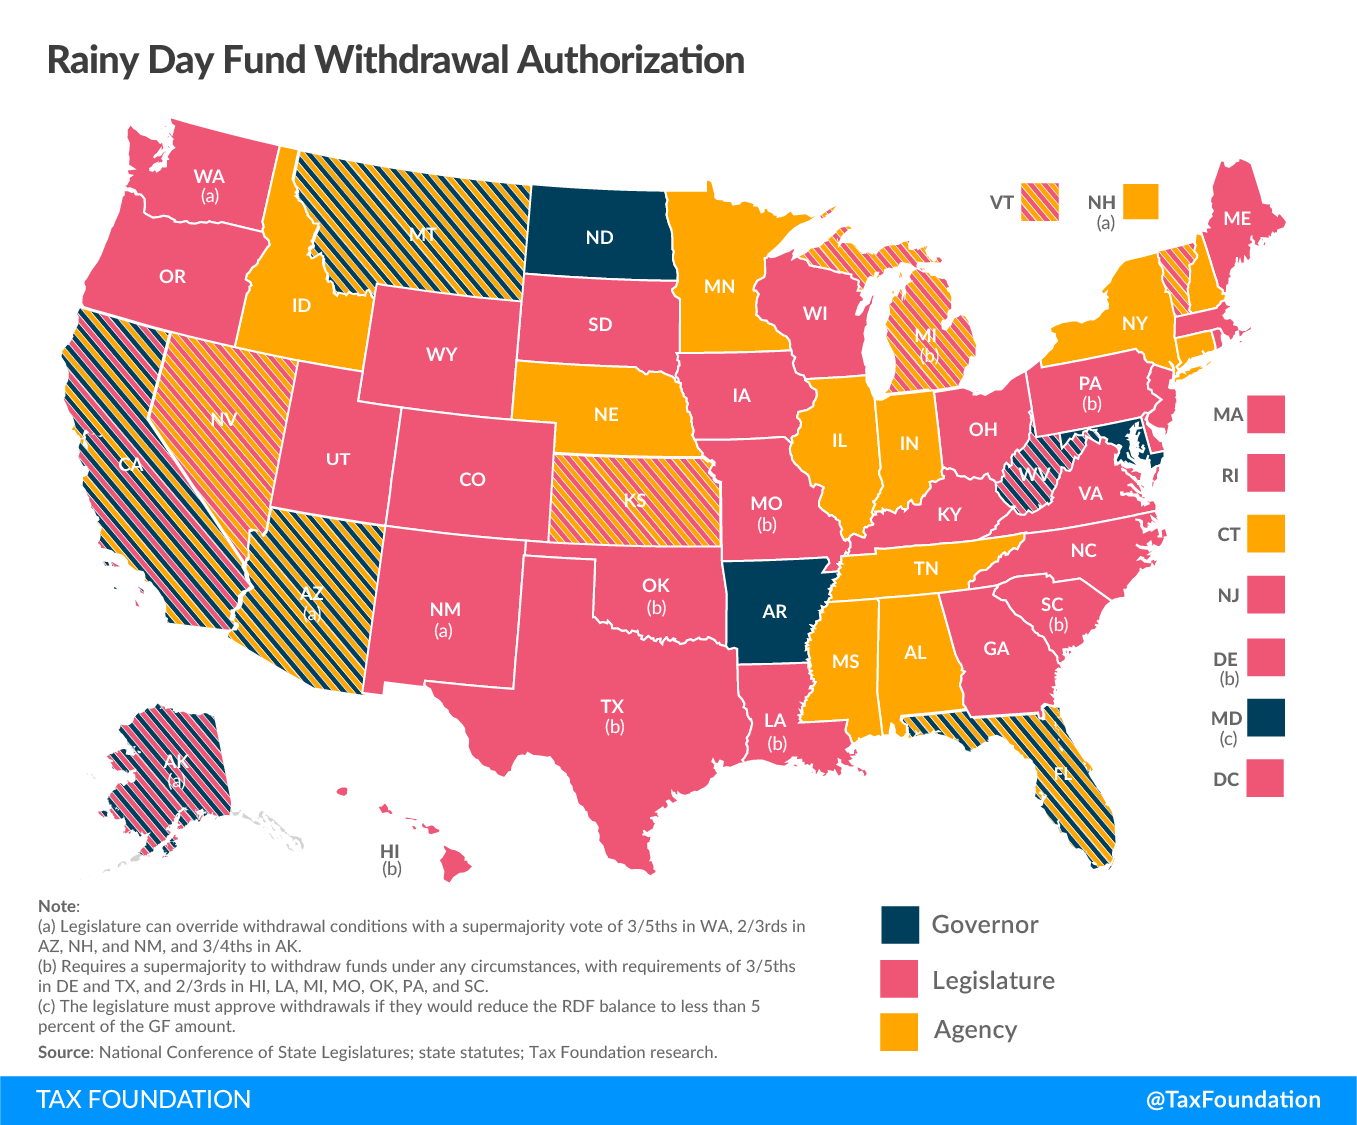 Who Can Authorize a Withdrawal from A Rainy Day Fund? State Rainy Day Fund Withdrawal Authorization